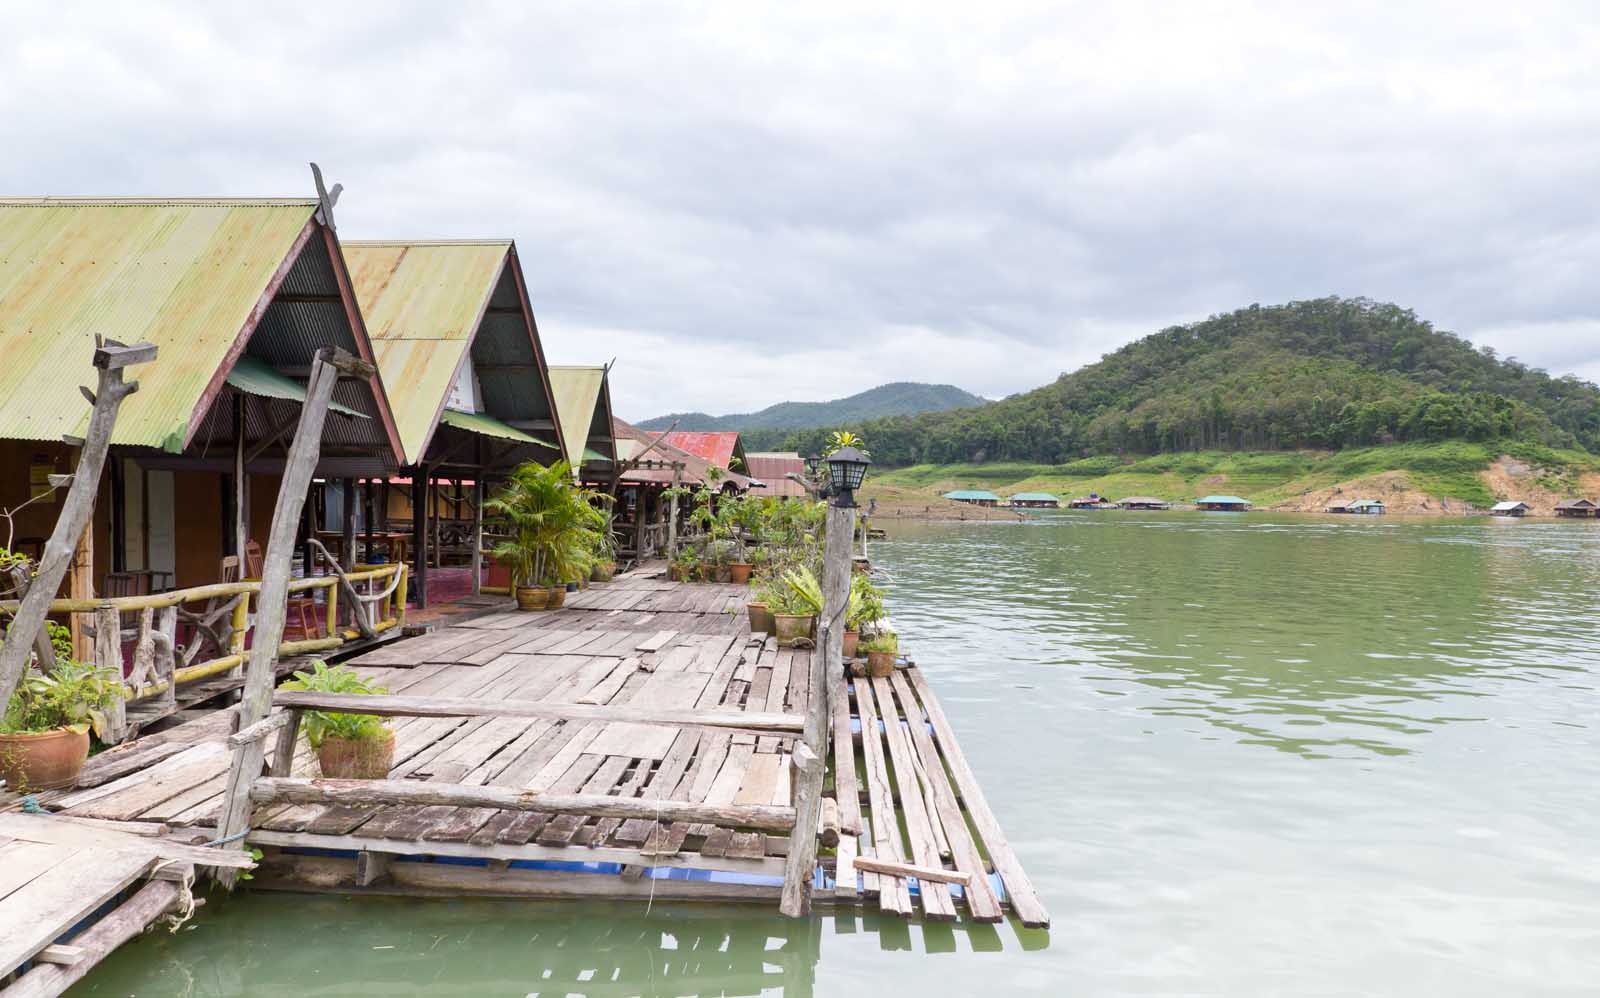 Raft floating home in Mae Ngat Dam, Chiang Mai Province, Thailand